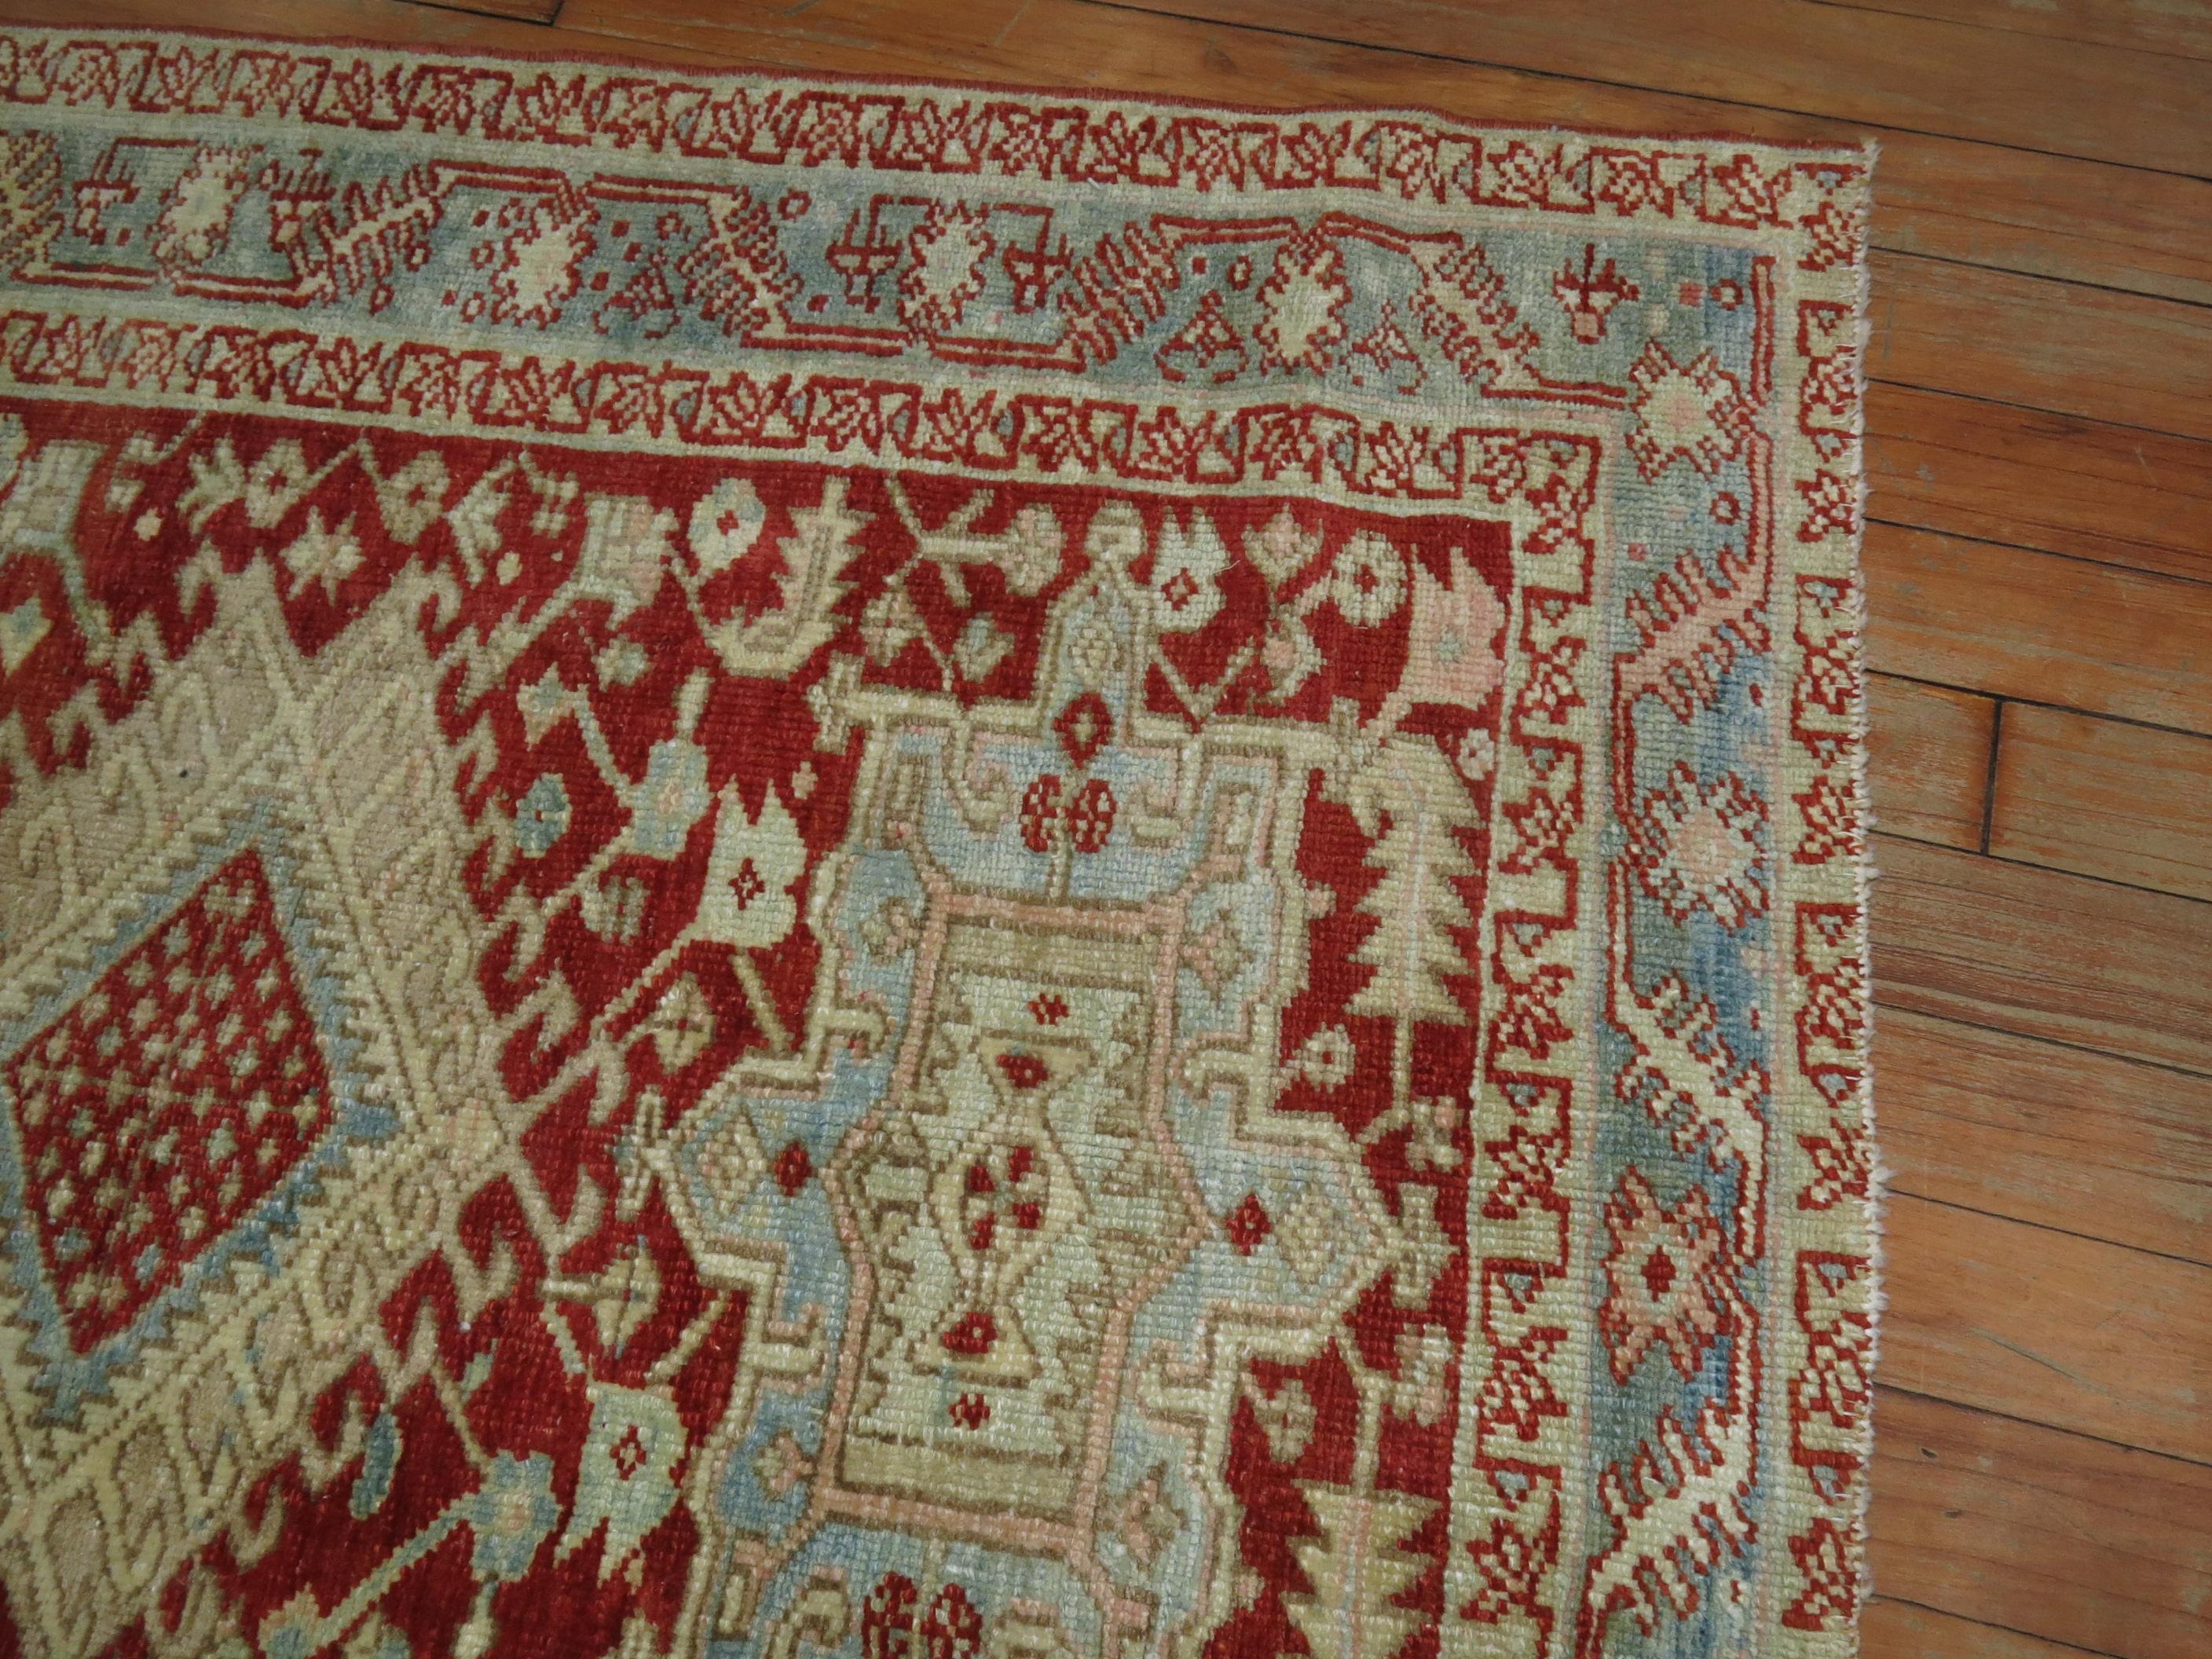 Rustic Cranberry Icy Blue Square Size Antique Persian Heriz Scatter Wool Handwoven Rug For Sale